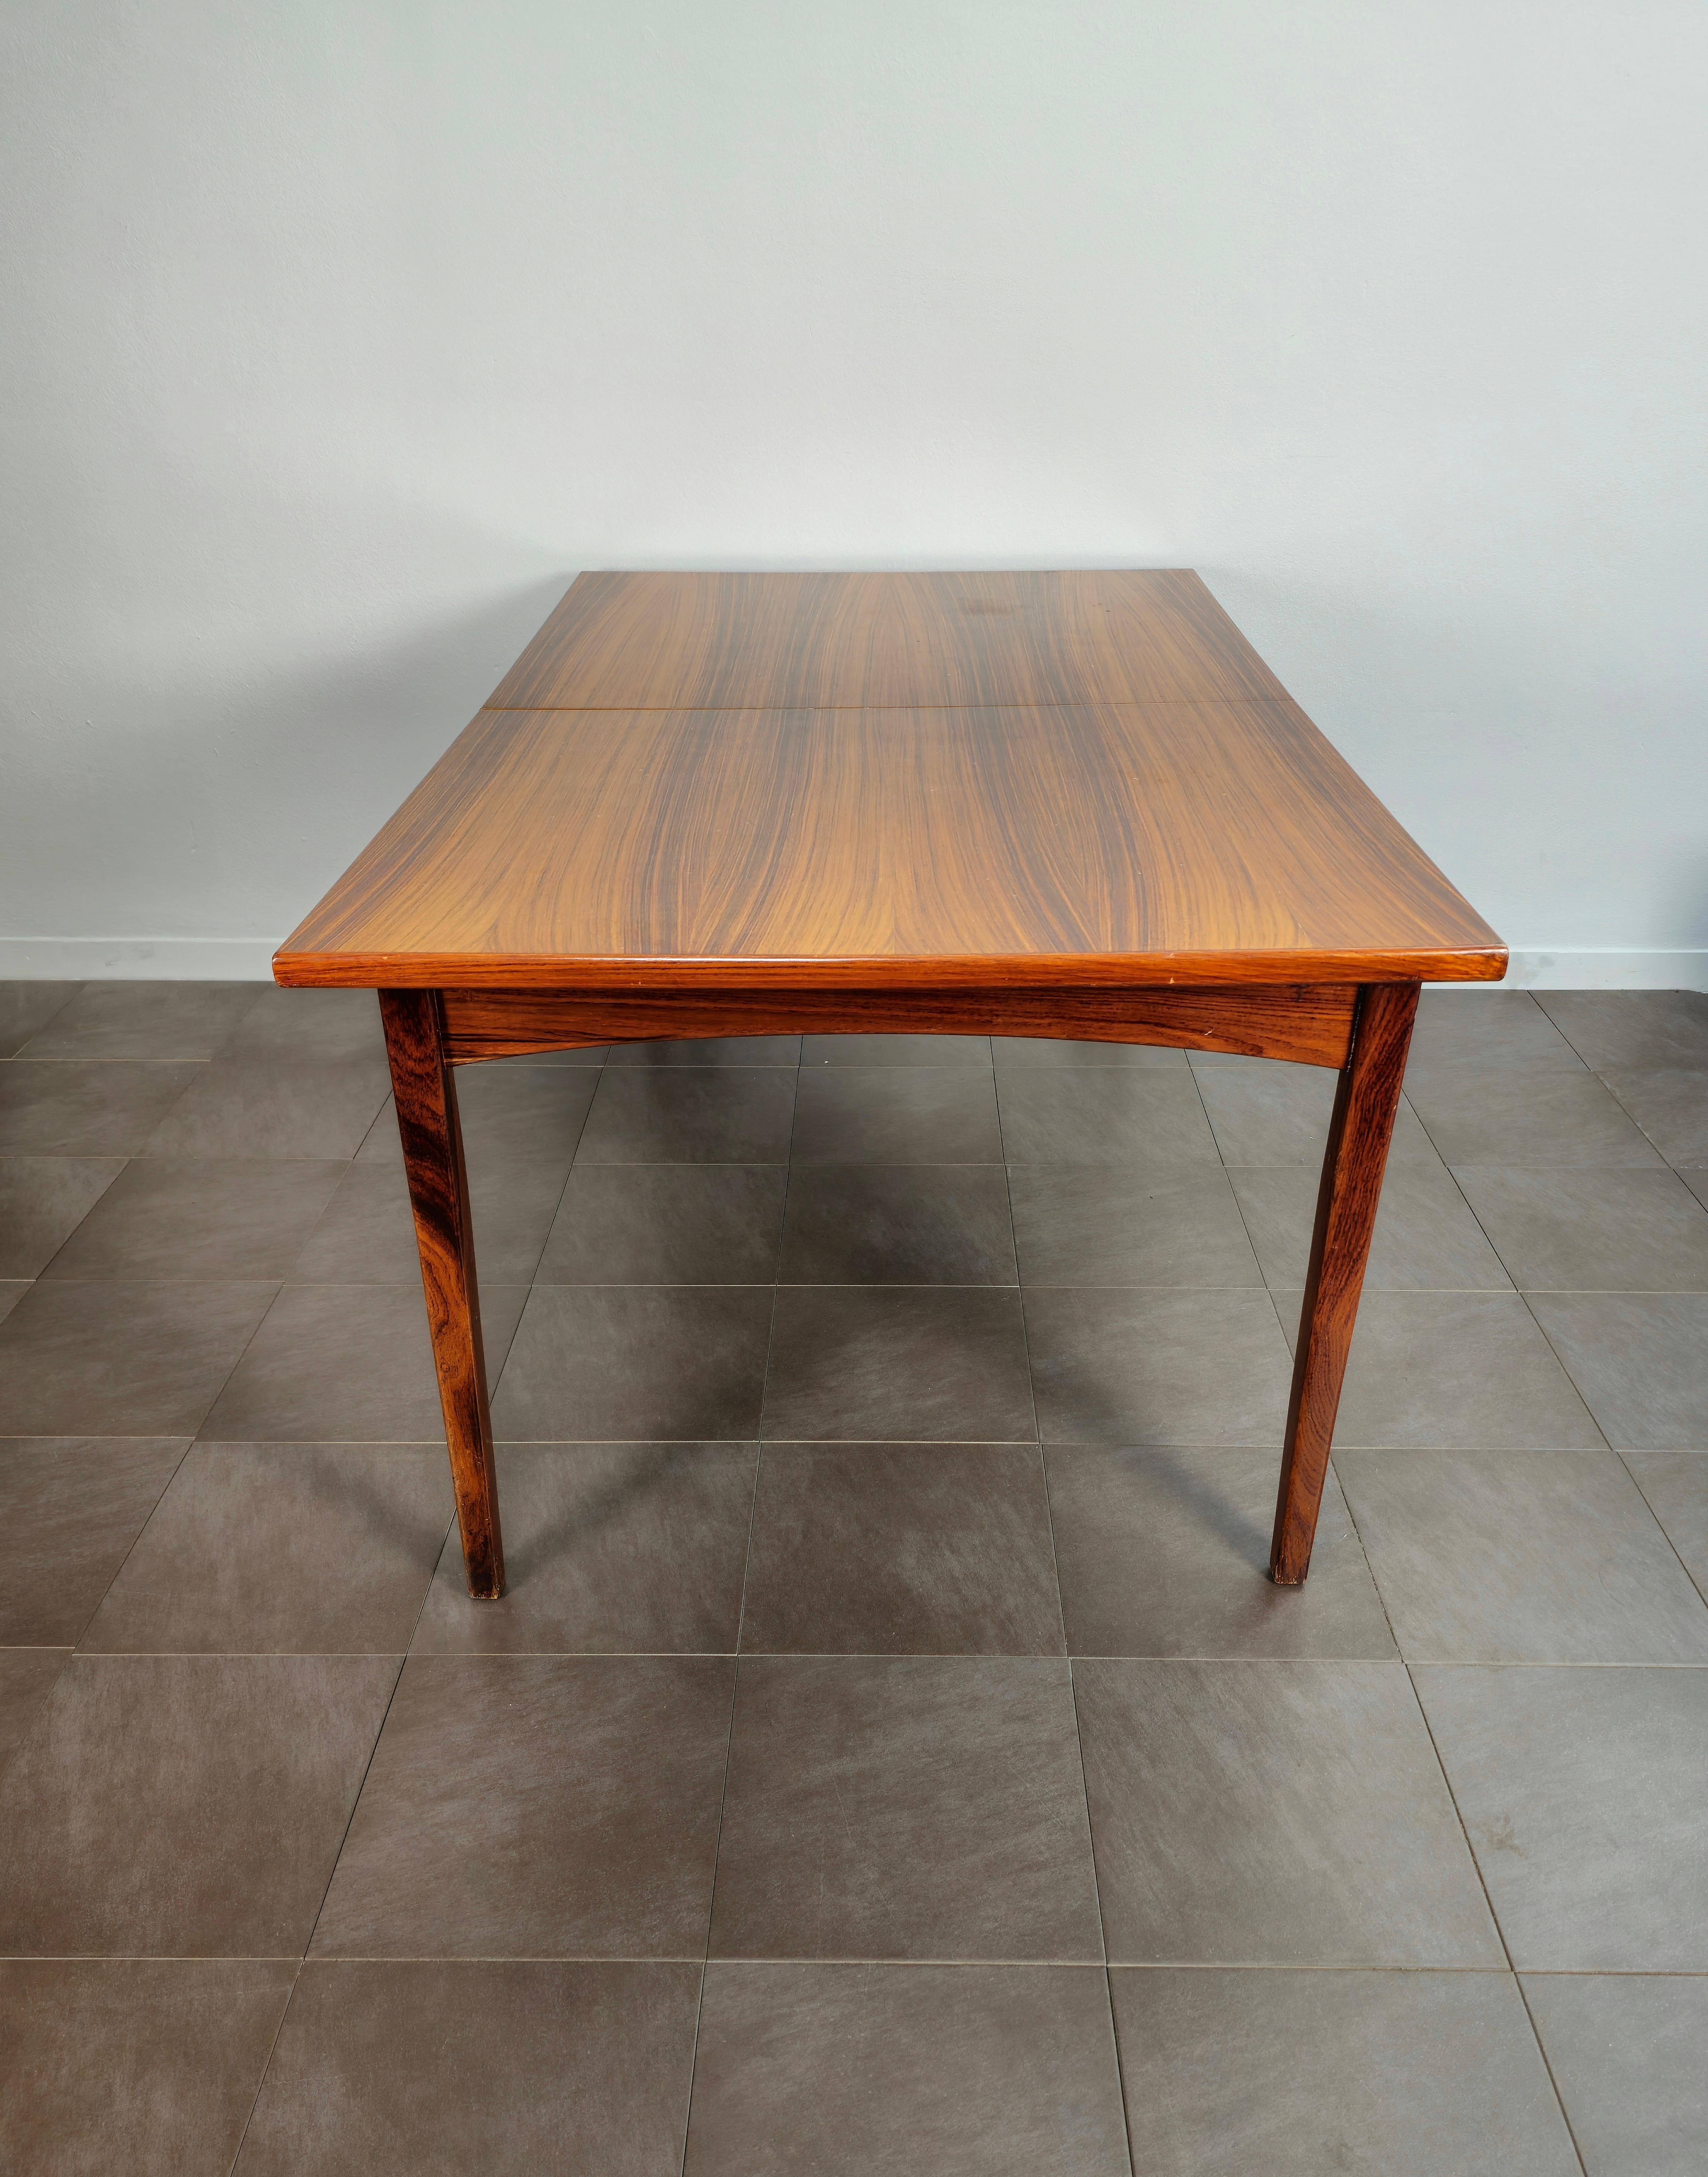 Wood Dining Room Table Extendable Large Rectangular Midcentury, Denmark, 1960s In Good Condition For Sale In Palermo, IT